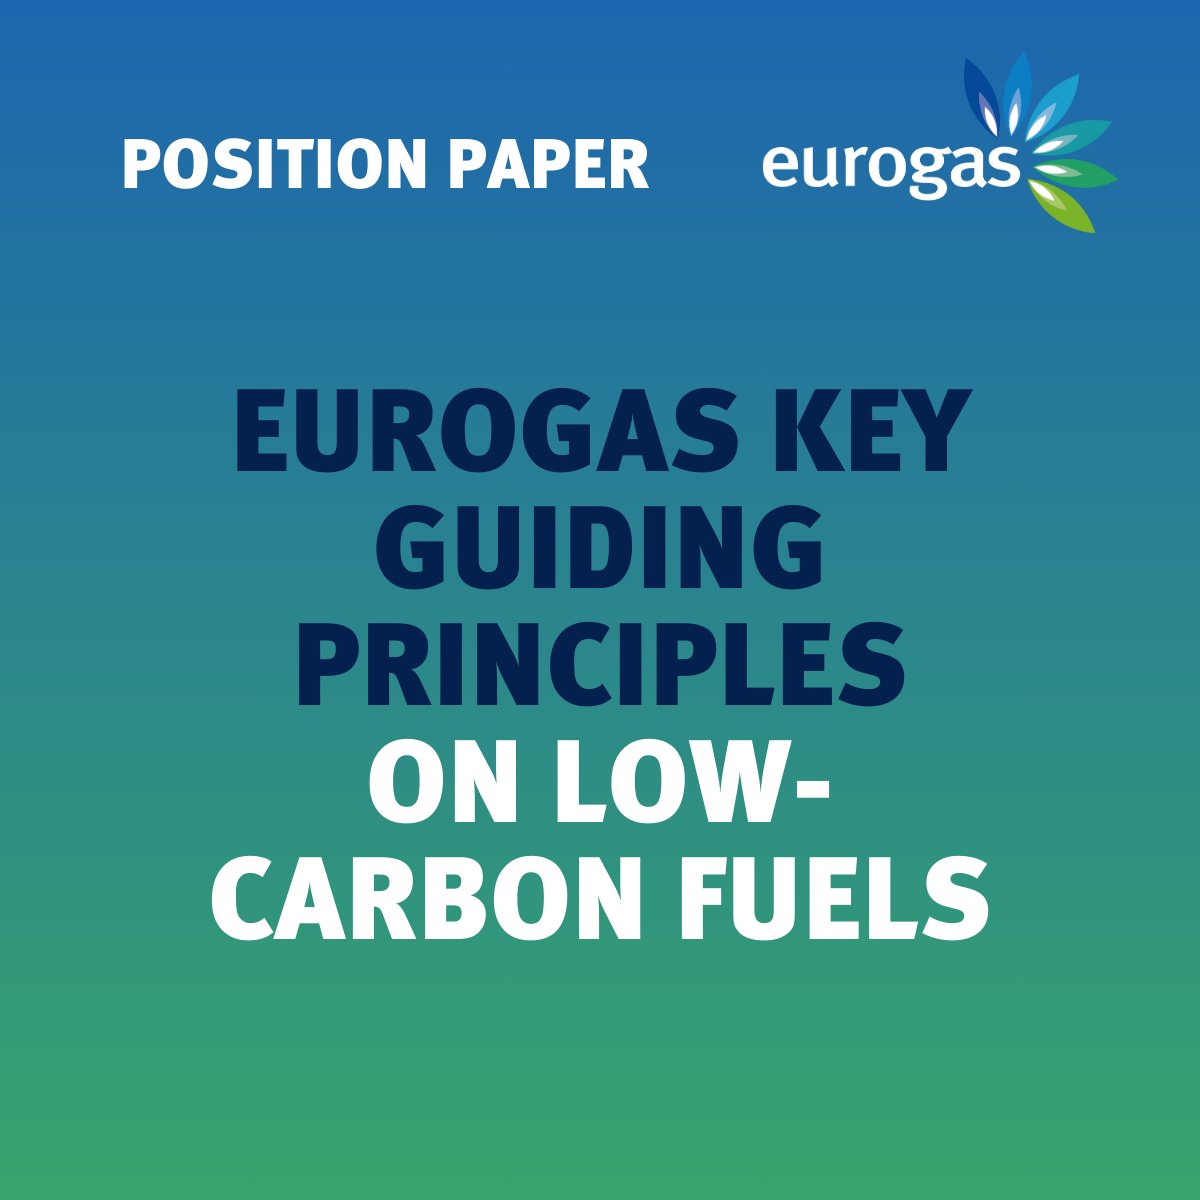 📣 We support the delivery of the Gas Directive and recommend guiding principles for the certification of #lowcarbon fuels.

💡Low-carbon fuels’ production and implementation can help us reduce GHG emission & achieve climate objectives.

➡ Read more: lnkd.in/eaheCihJ